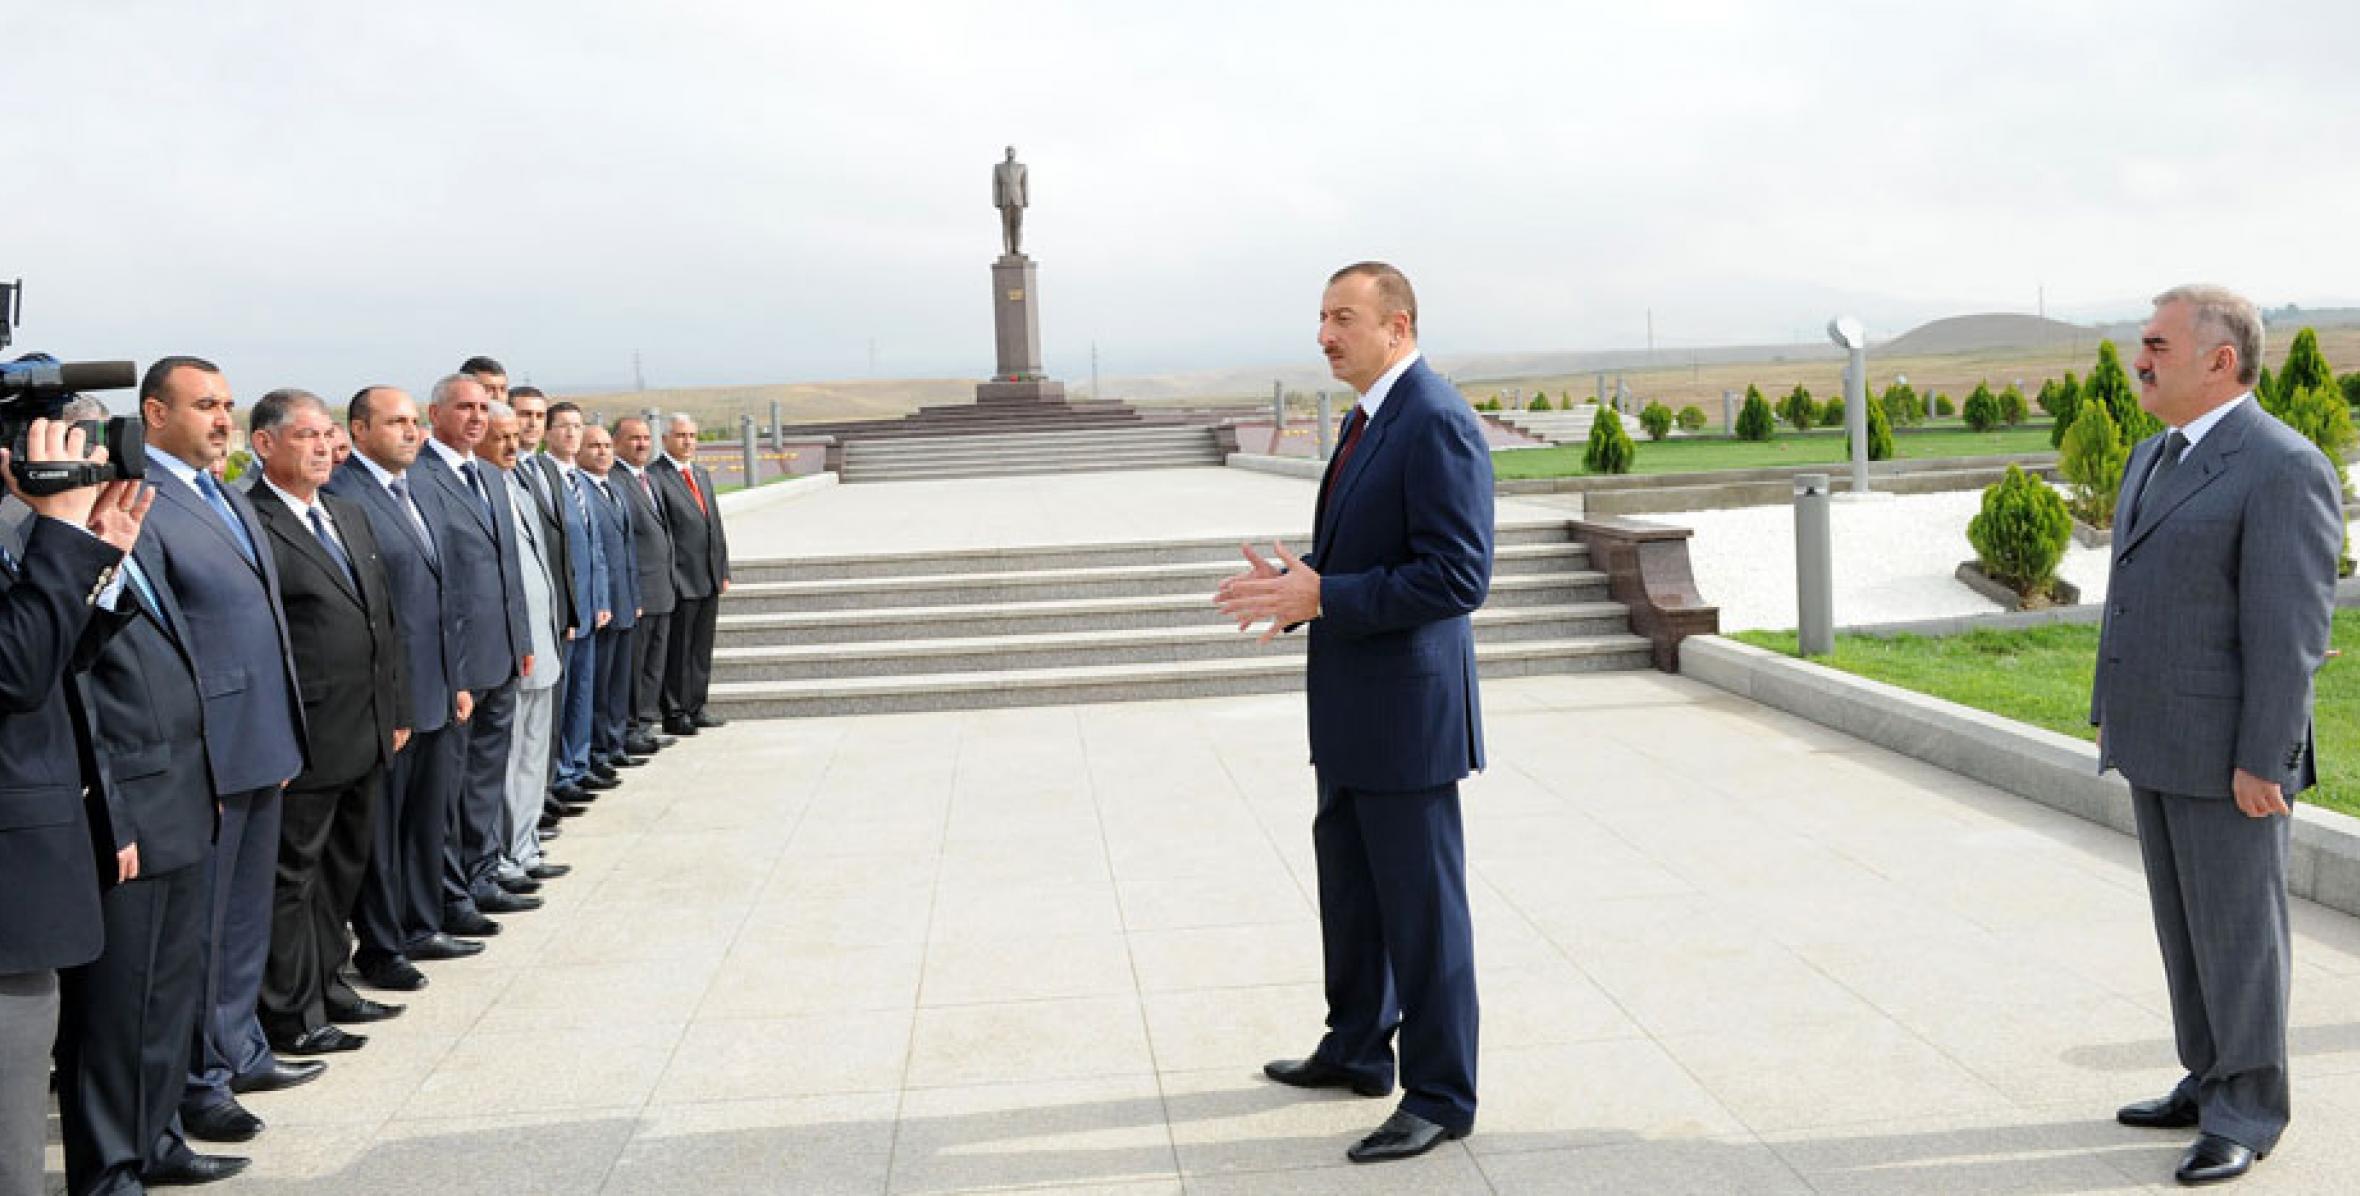 Ilham Aliyev attended the inauguration ceremony of a monument to national leader Heydar Aliyev in Kangarli region